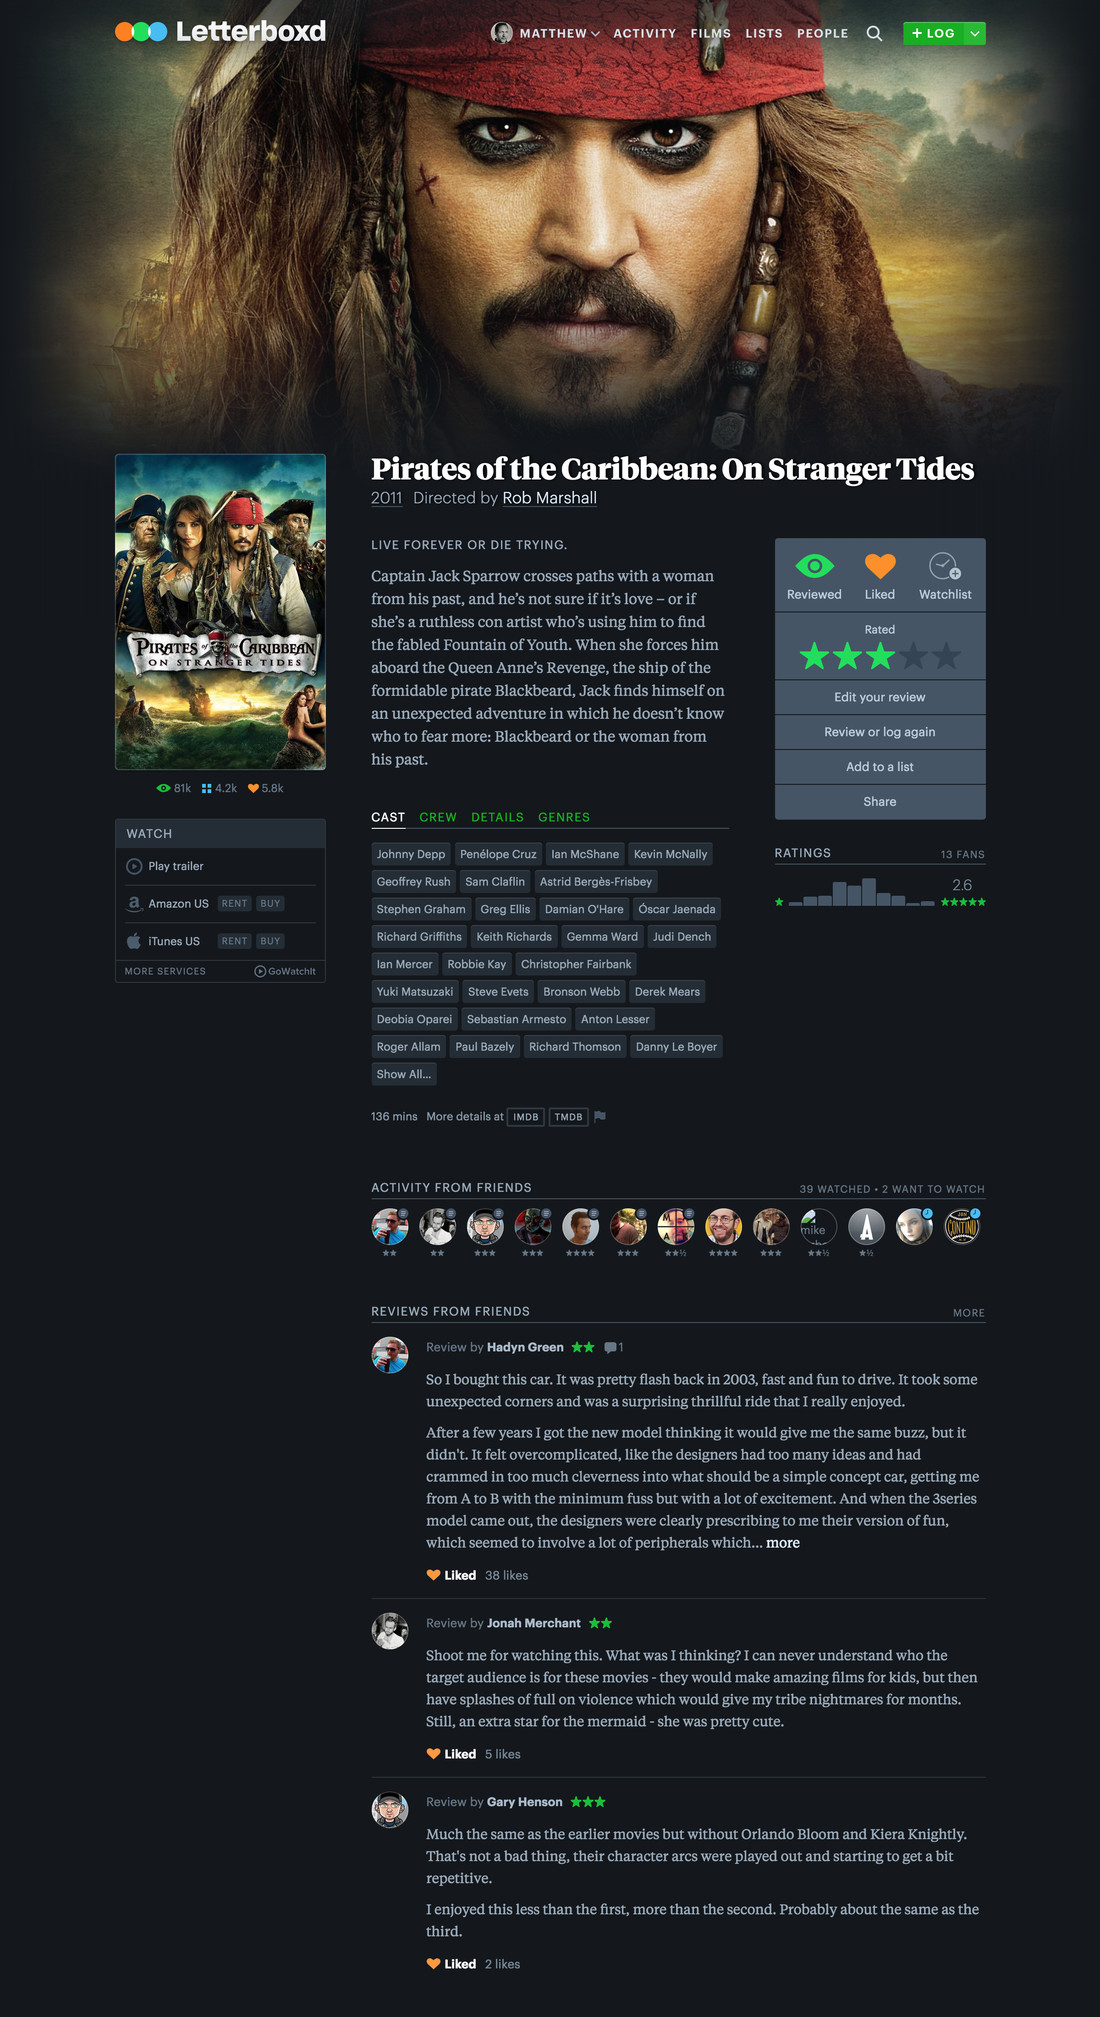 Detail image for Letterboxd